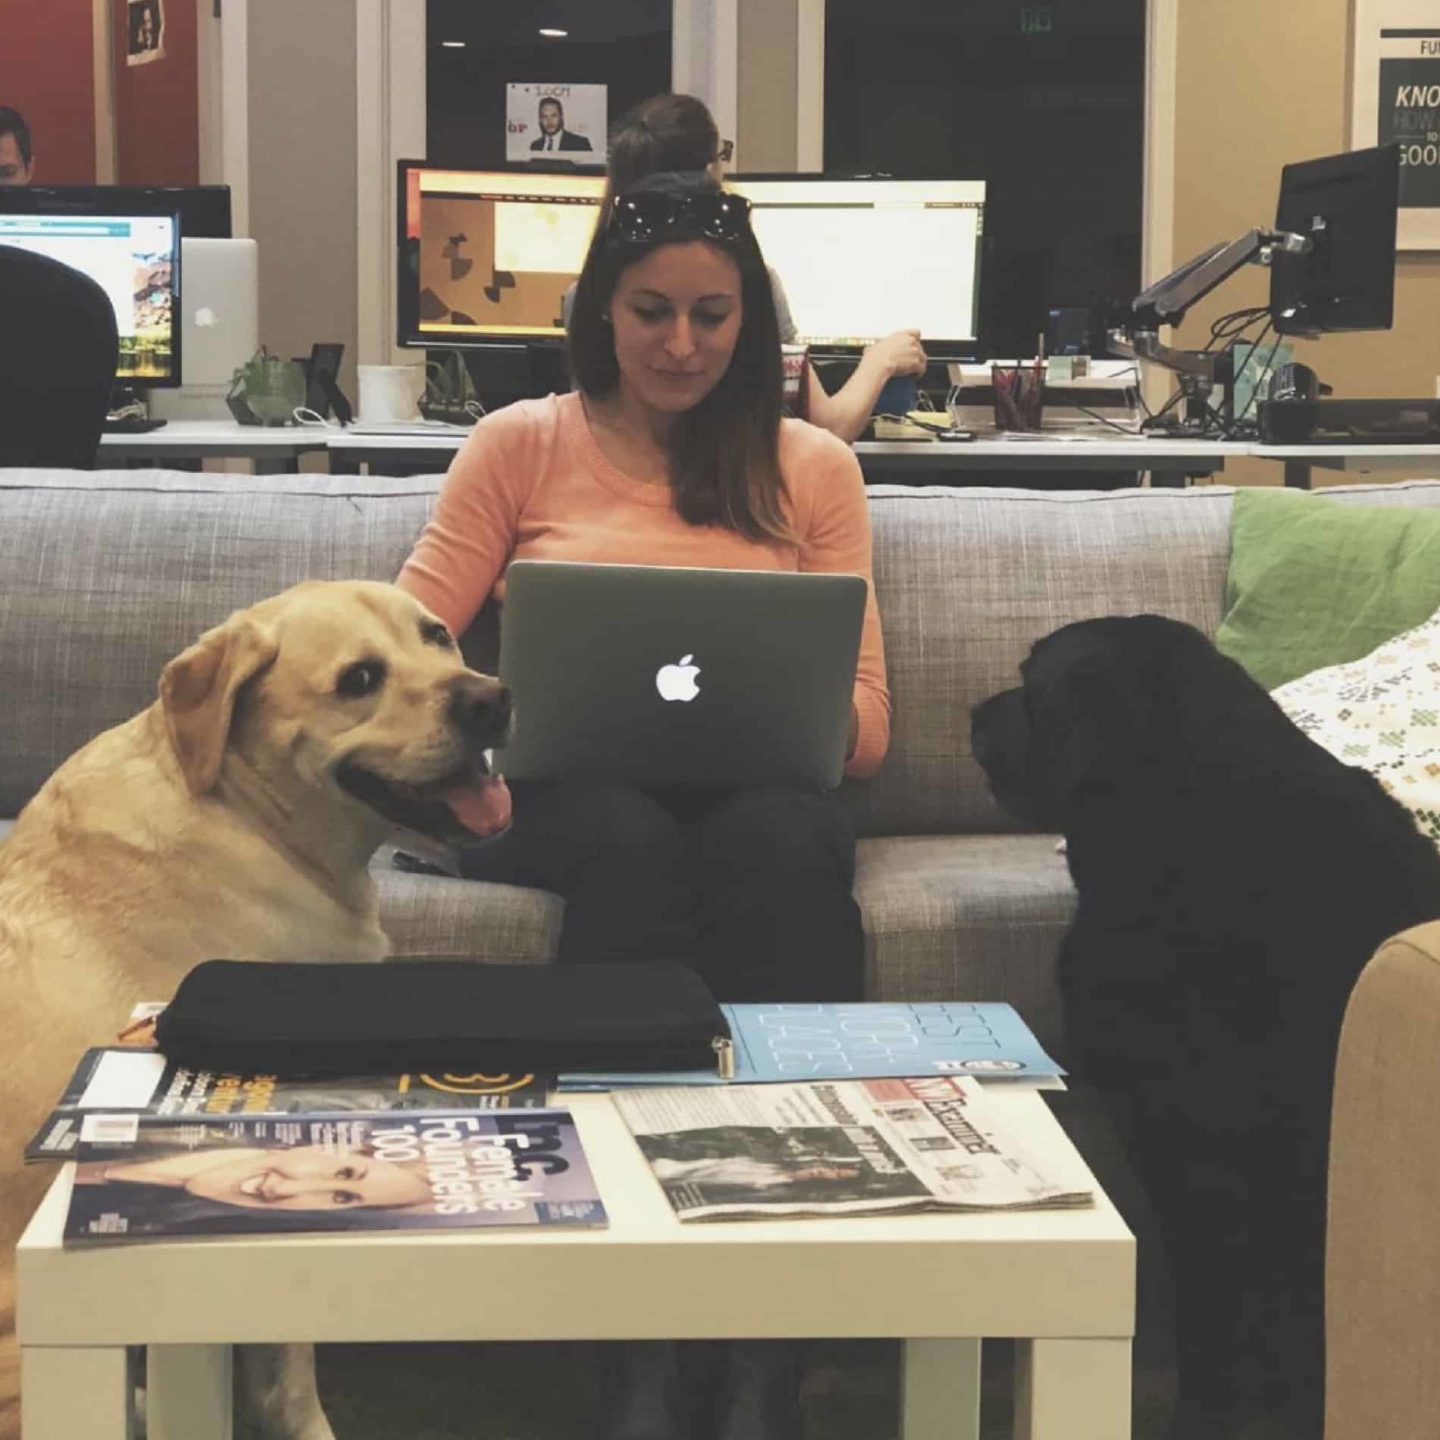 Mad fish employee sitting on couch with two dogs.